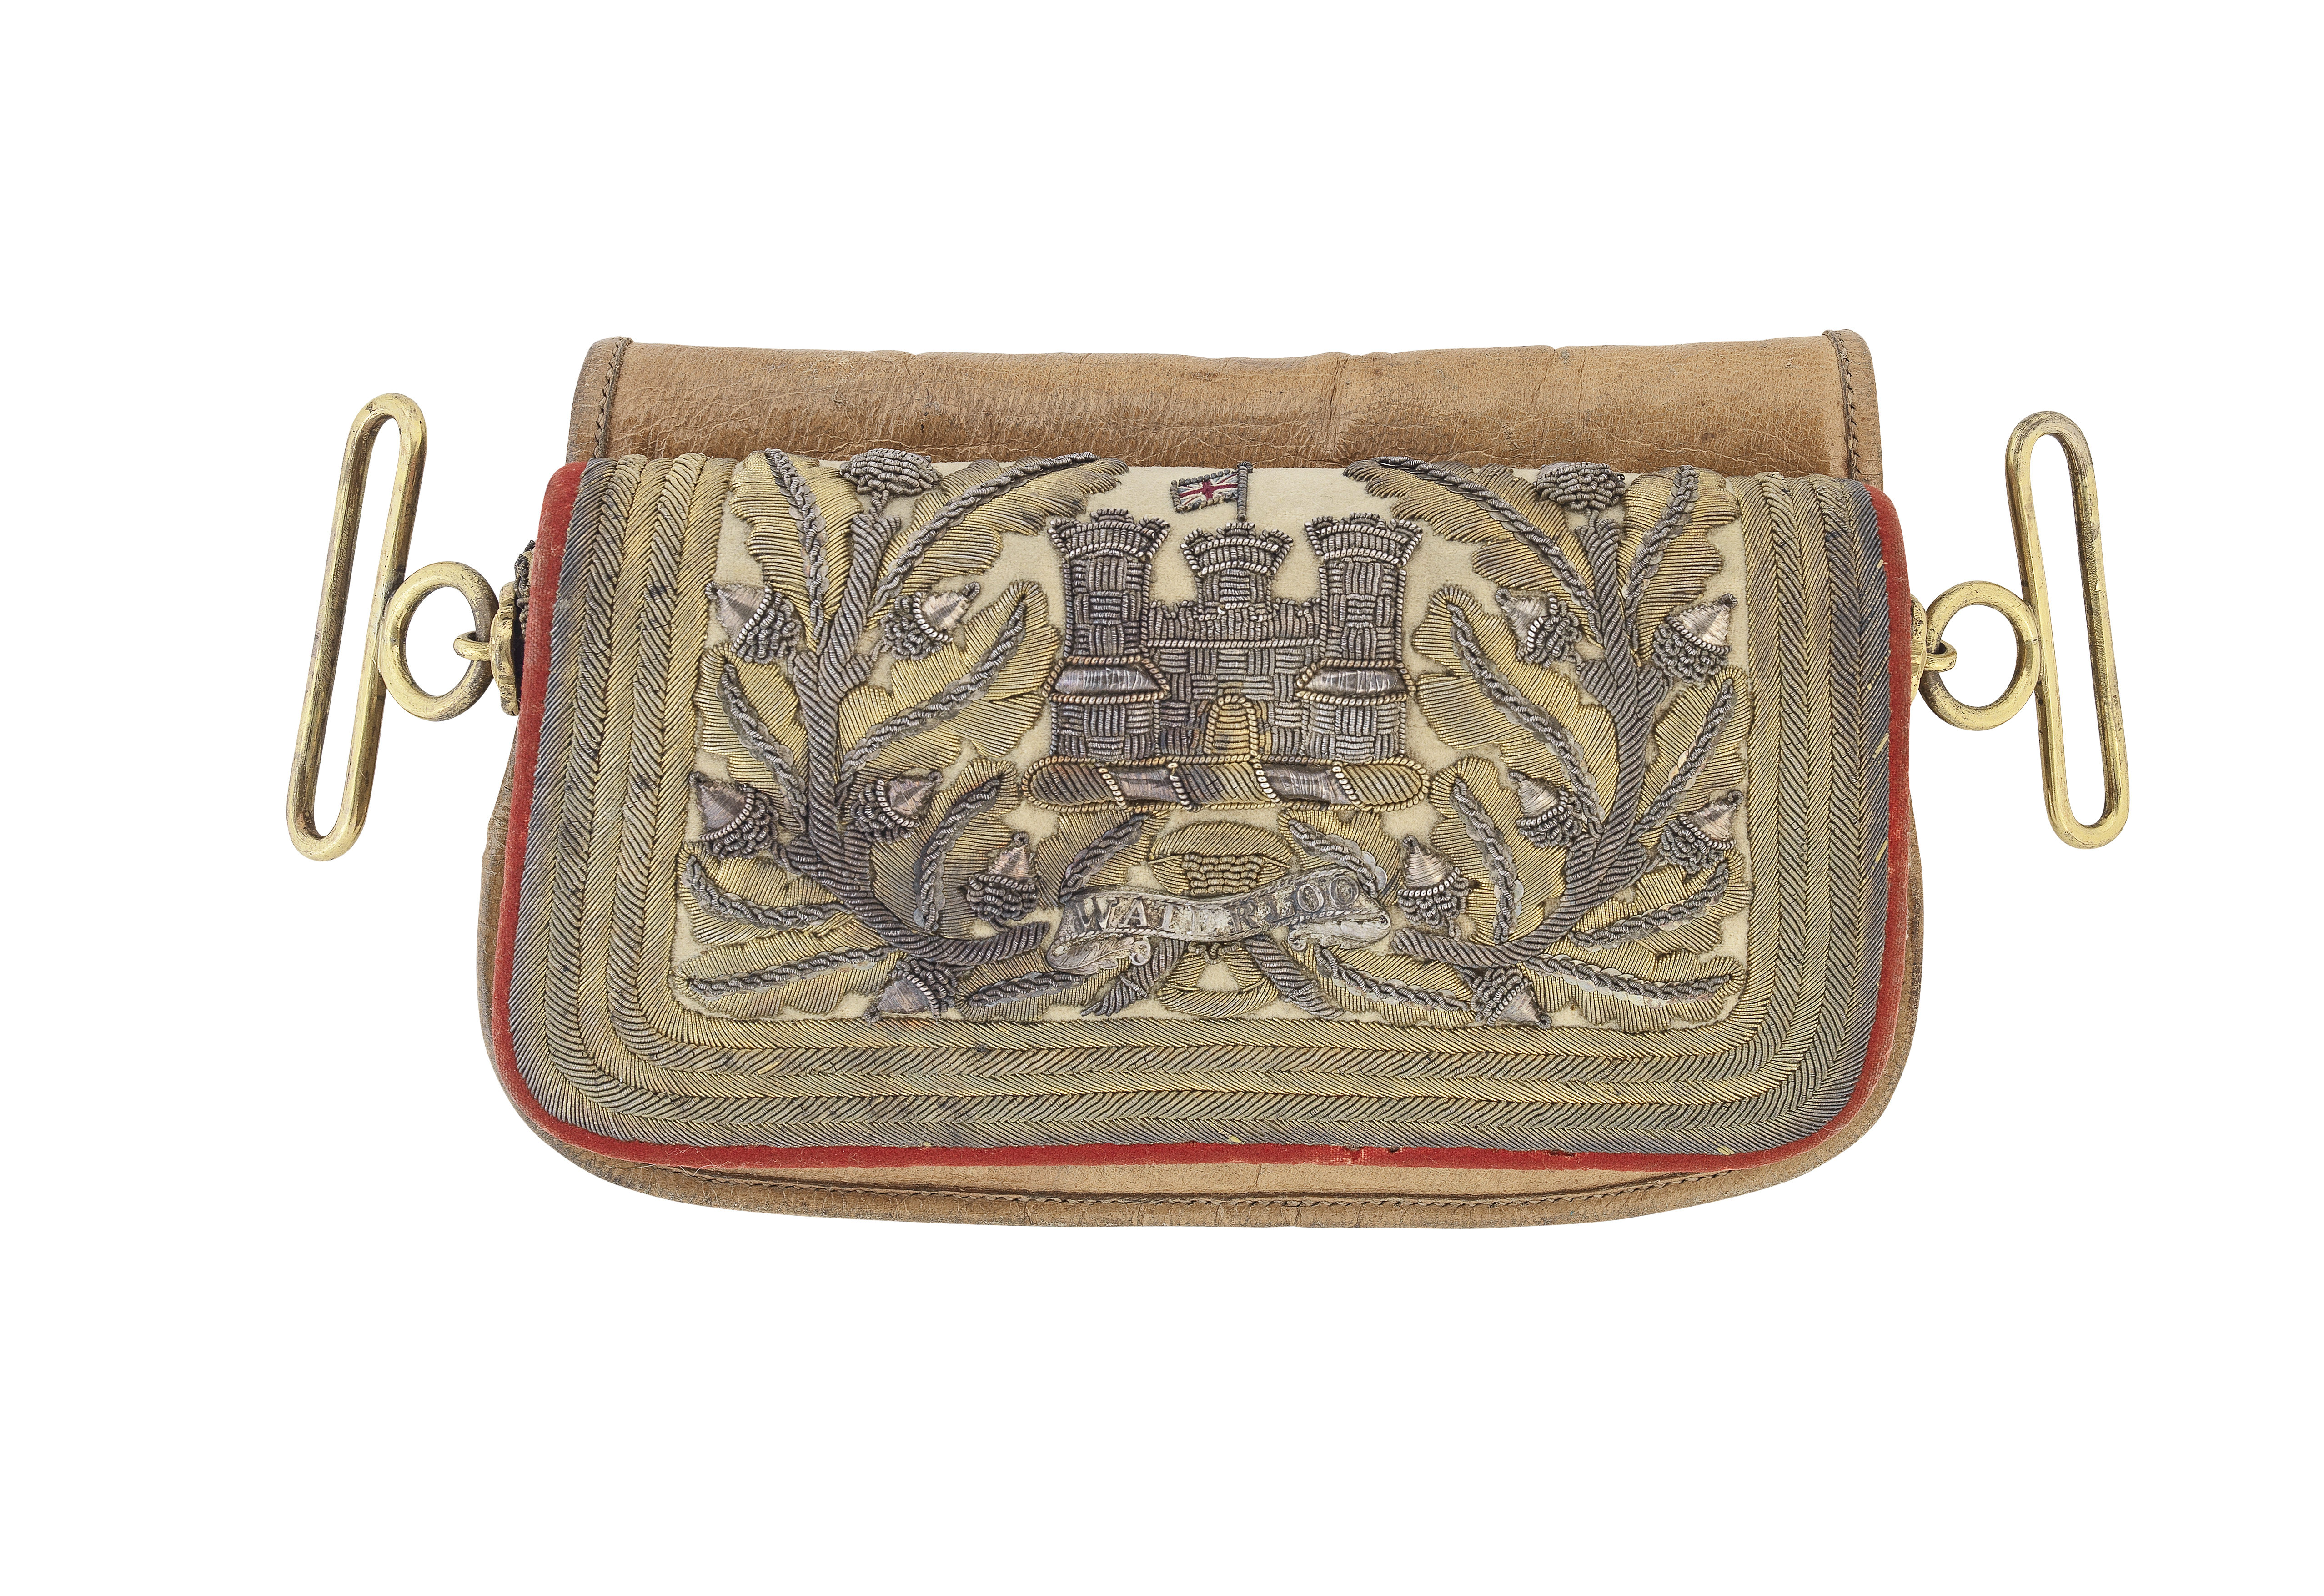 An Officer's Full Dress Pouch Of The 6th Inniskilling Dragoons